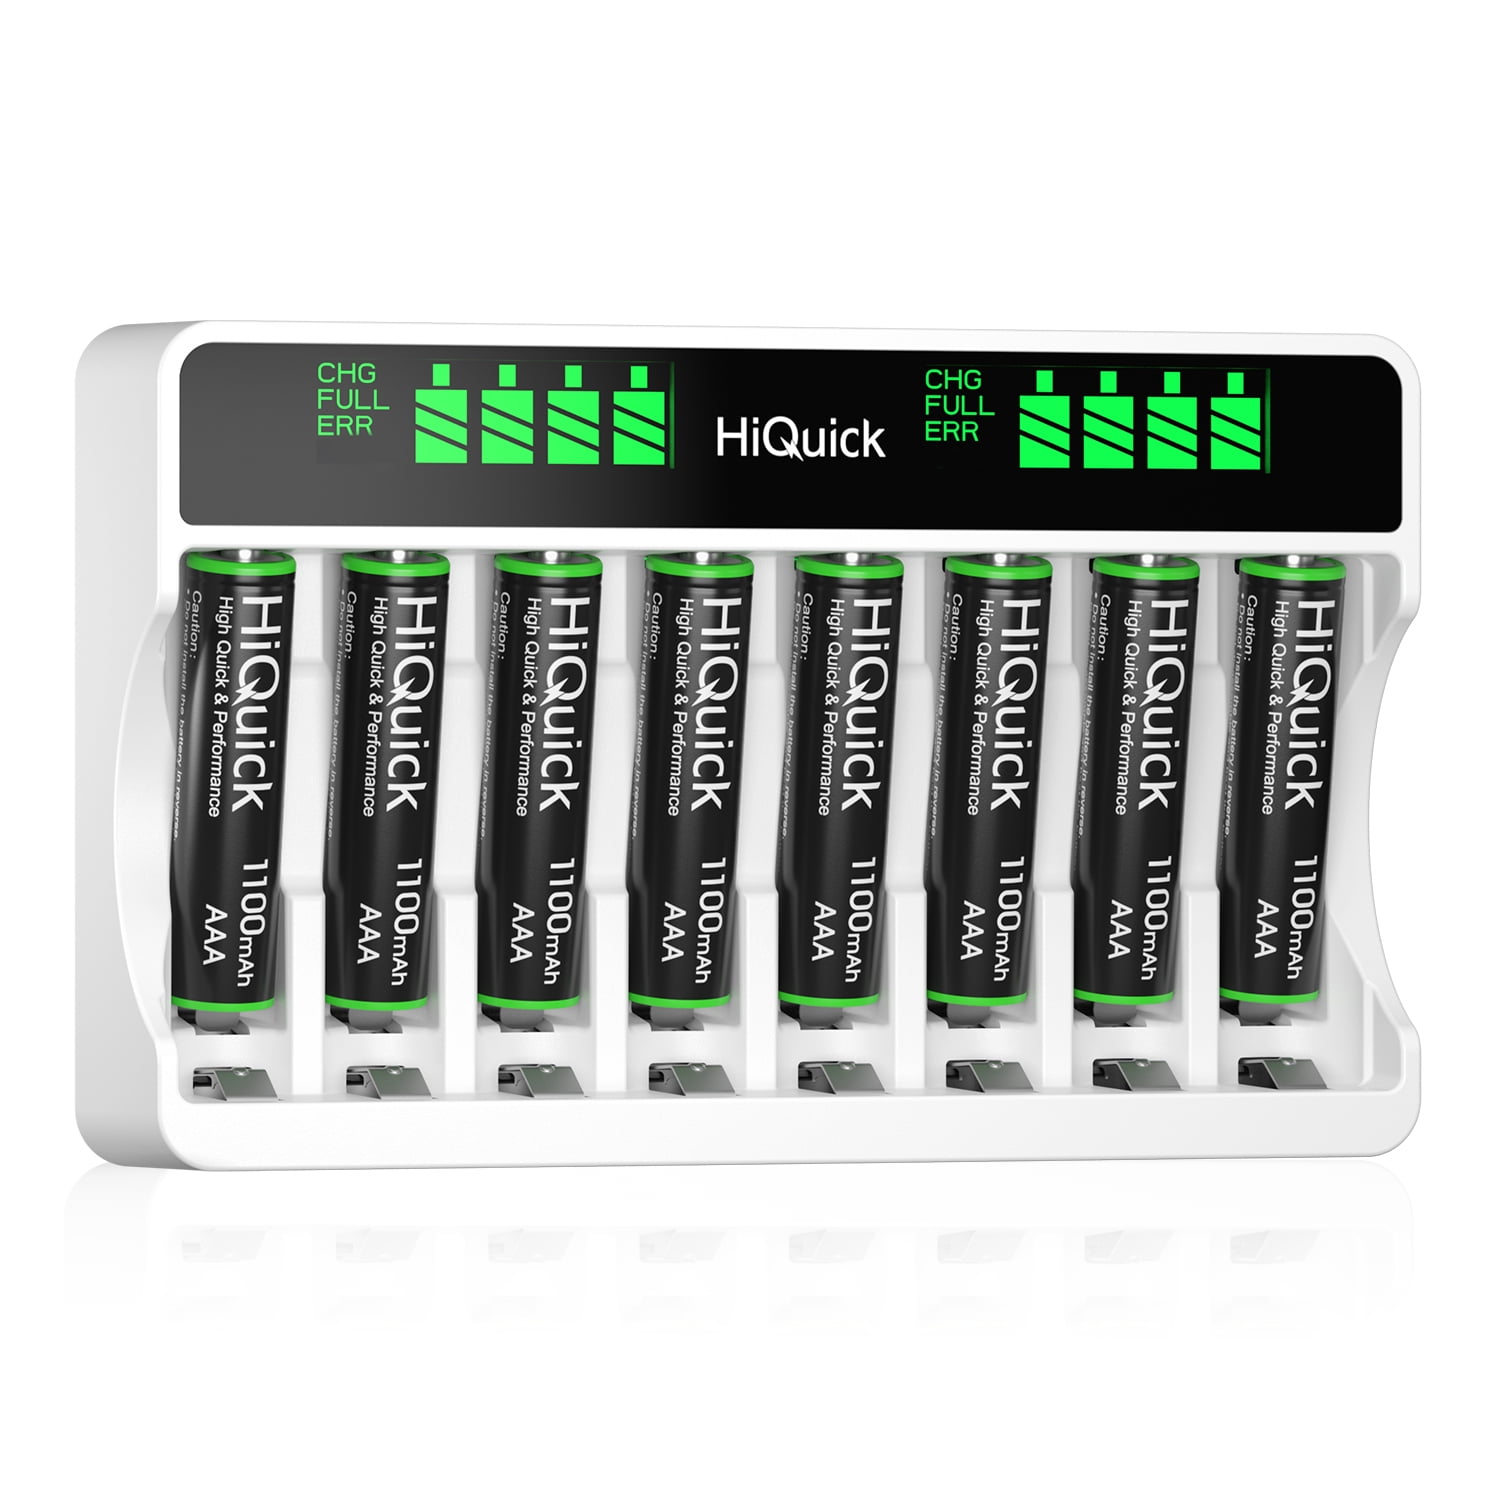 2x 280mAh Ni-Mh 9V Rechargeable Battery Charger For 9-Volt AA AAA NiMH NiCD 